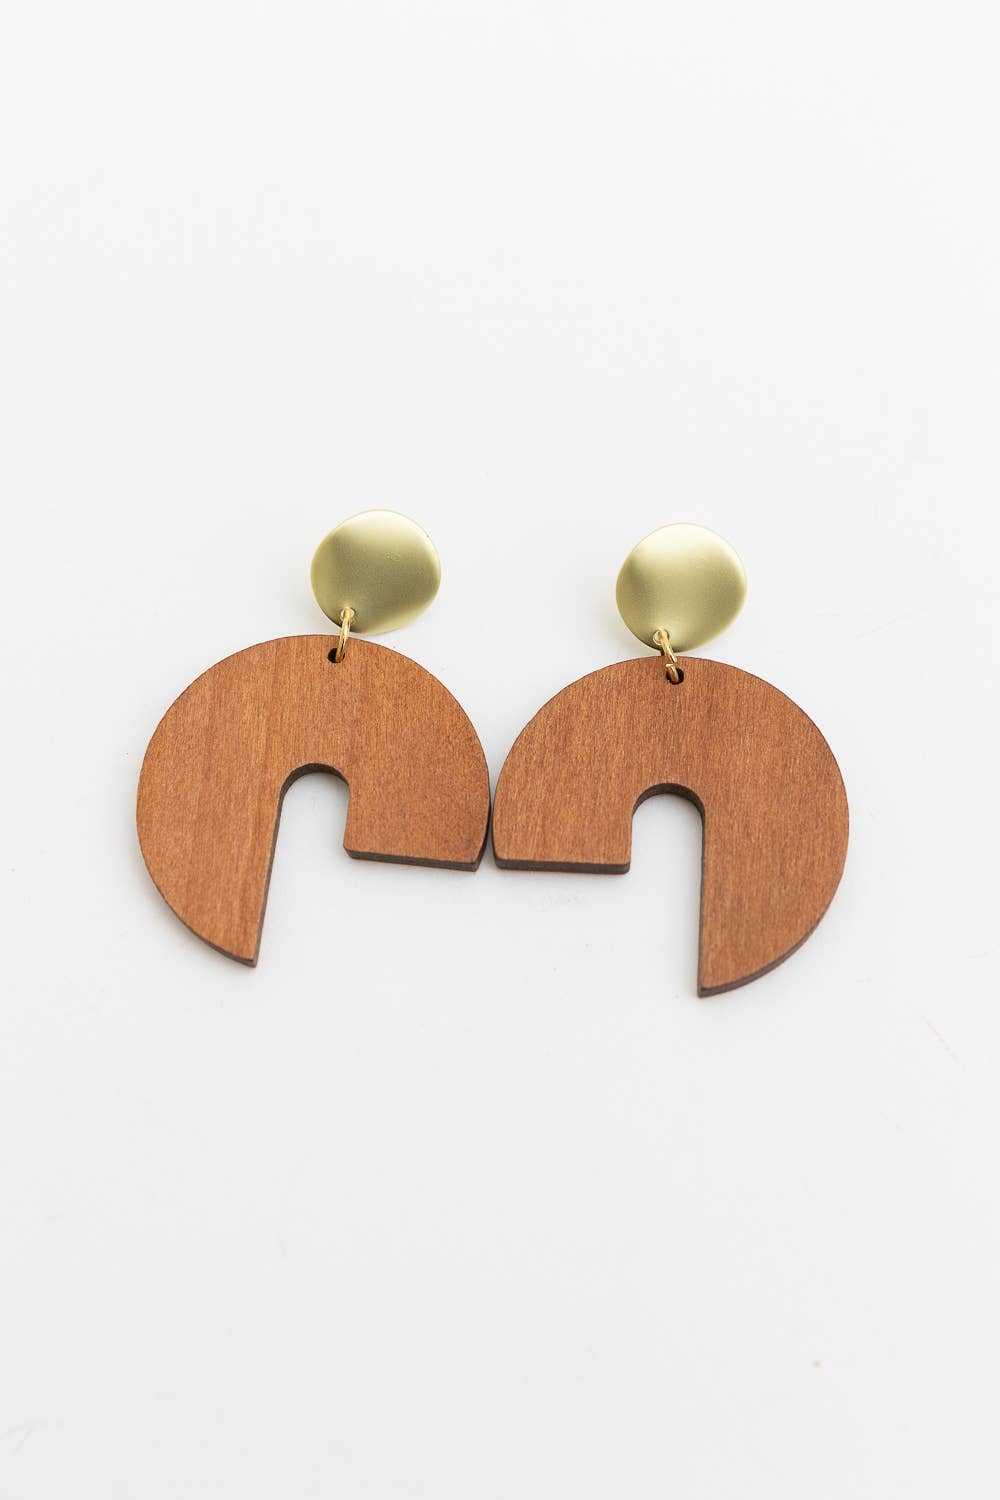 wooden modern arch shaped earrings on white background